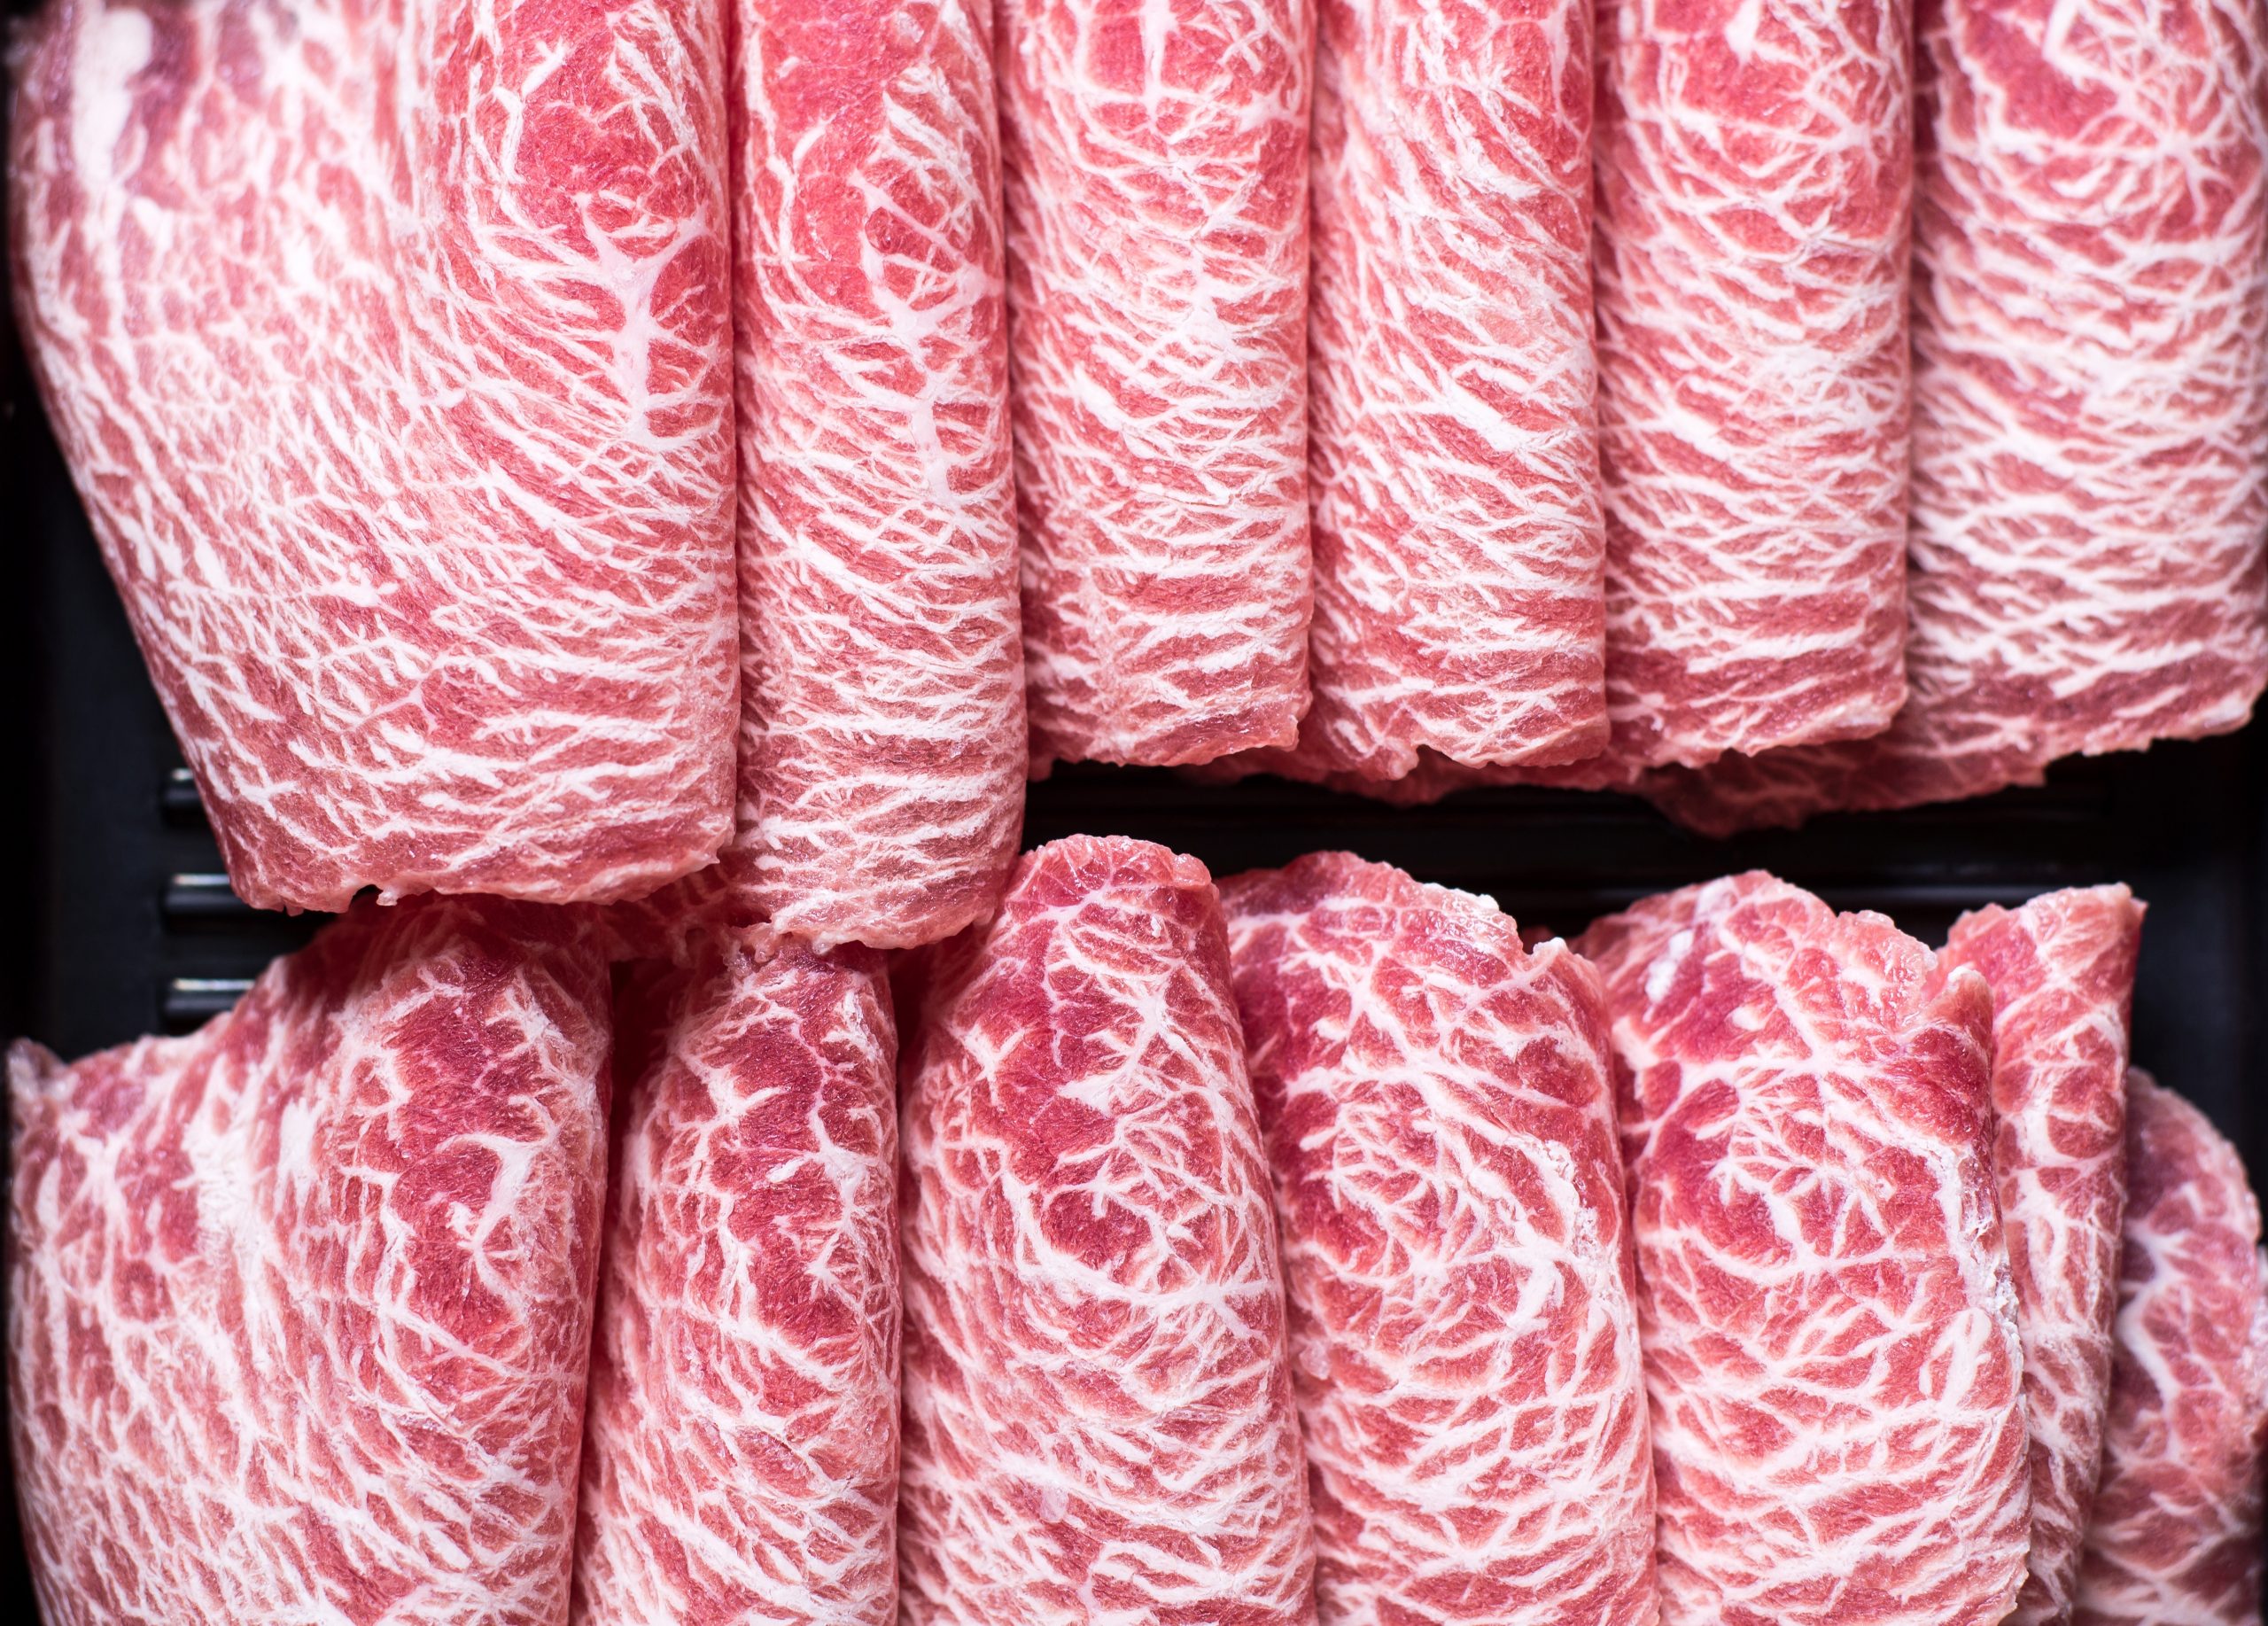 Large Quantities of Frozen Meat Seized for Violating Food Law